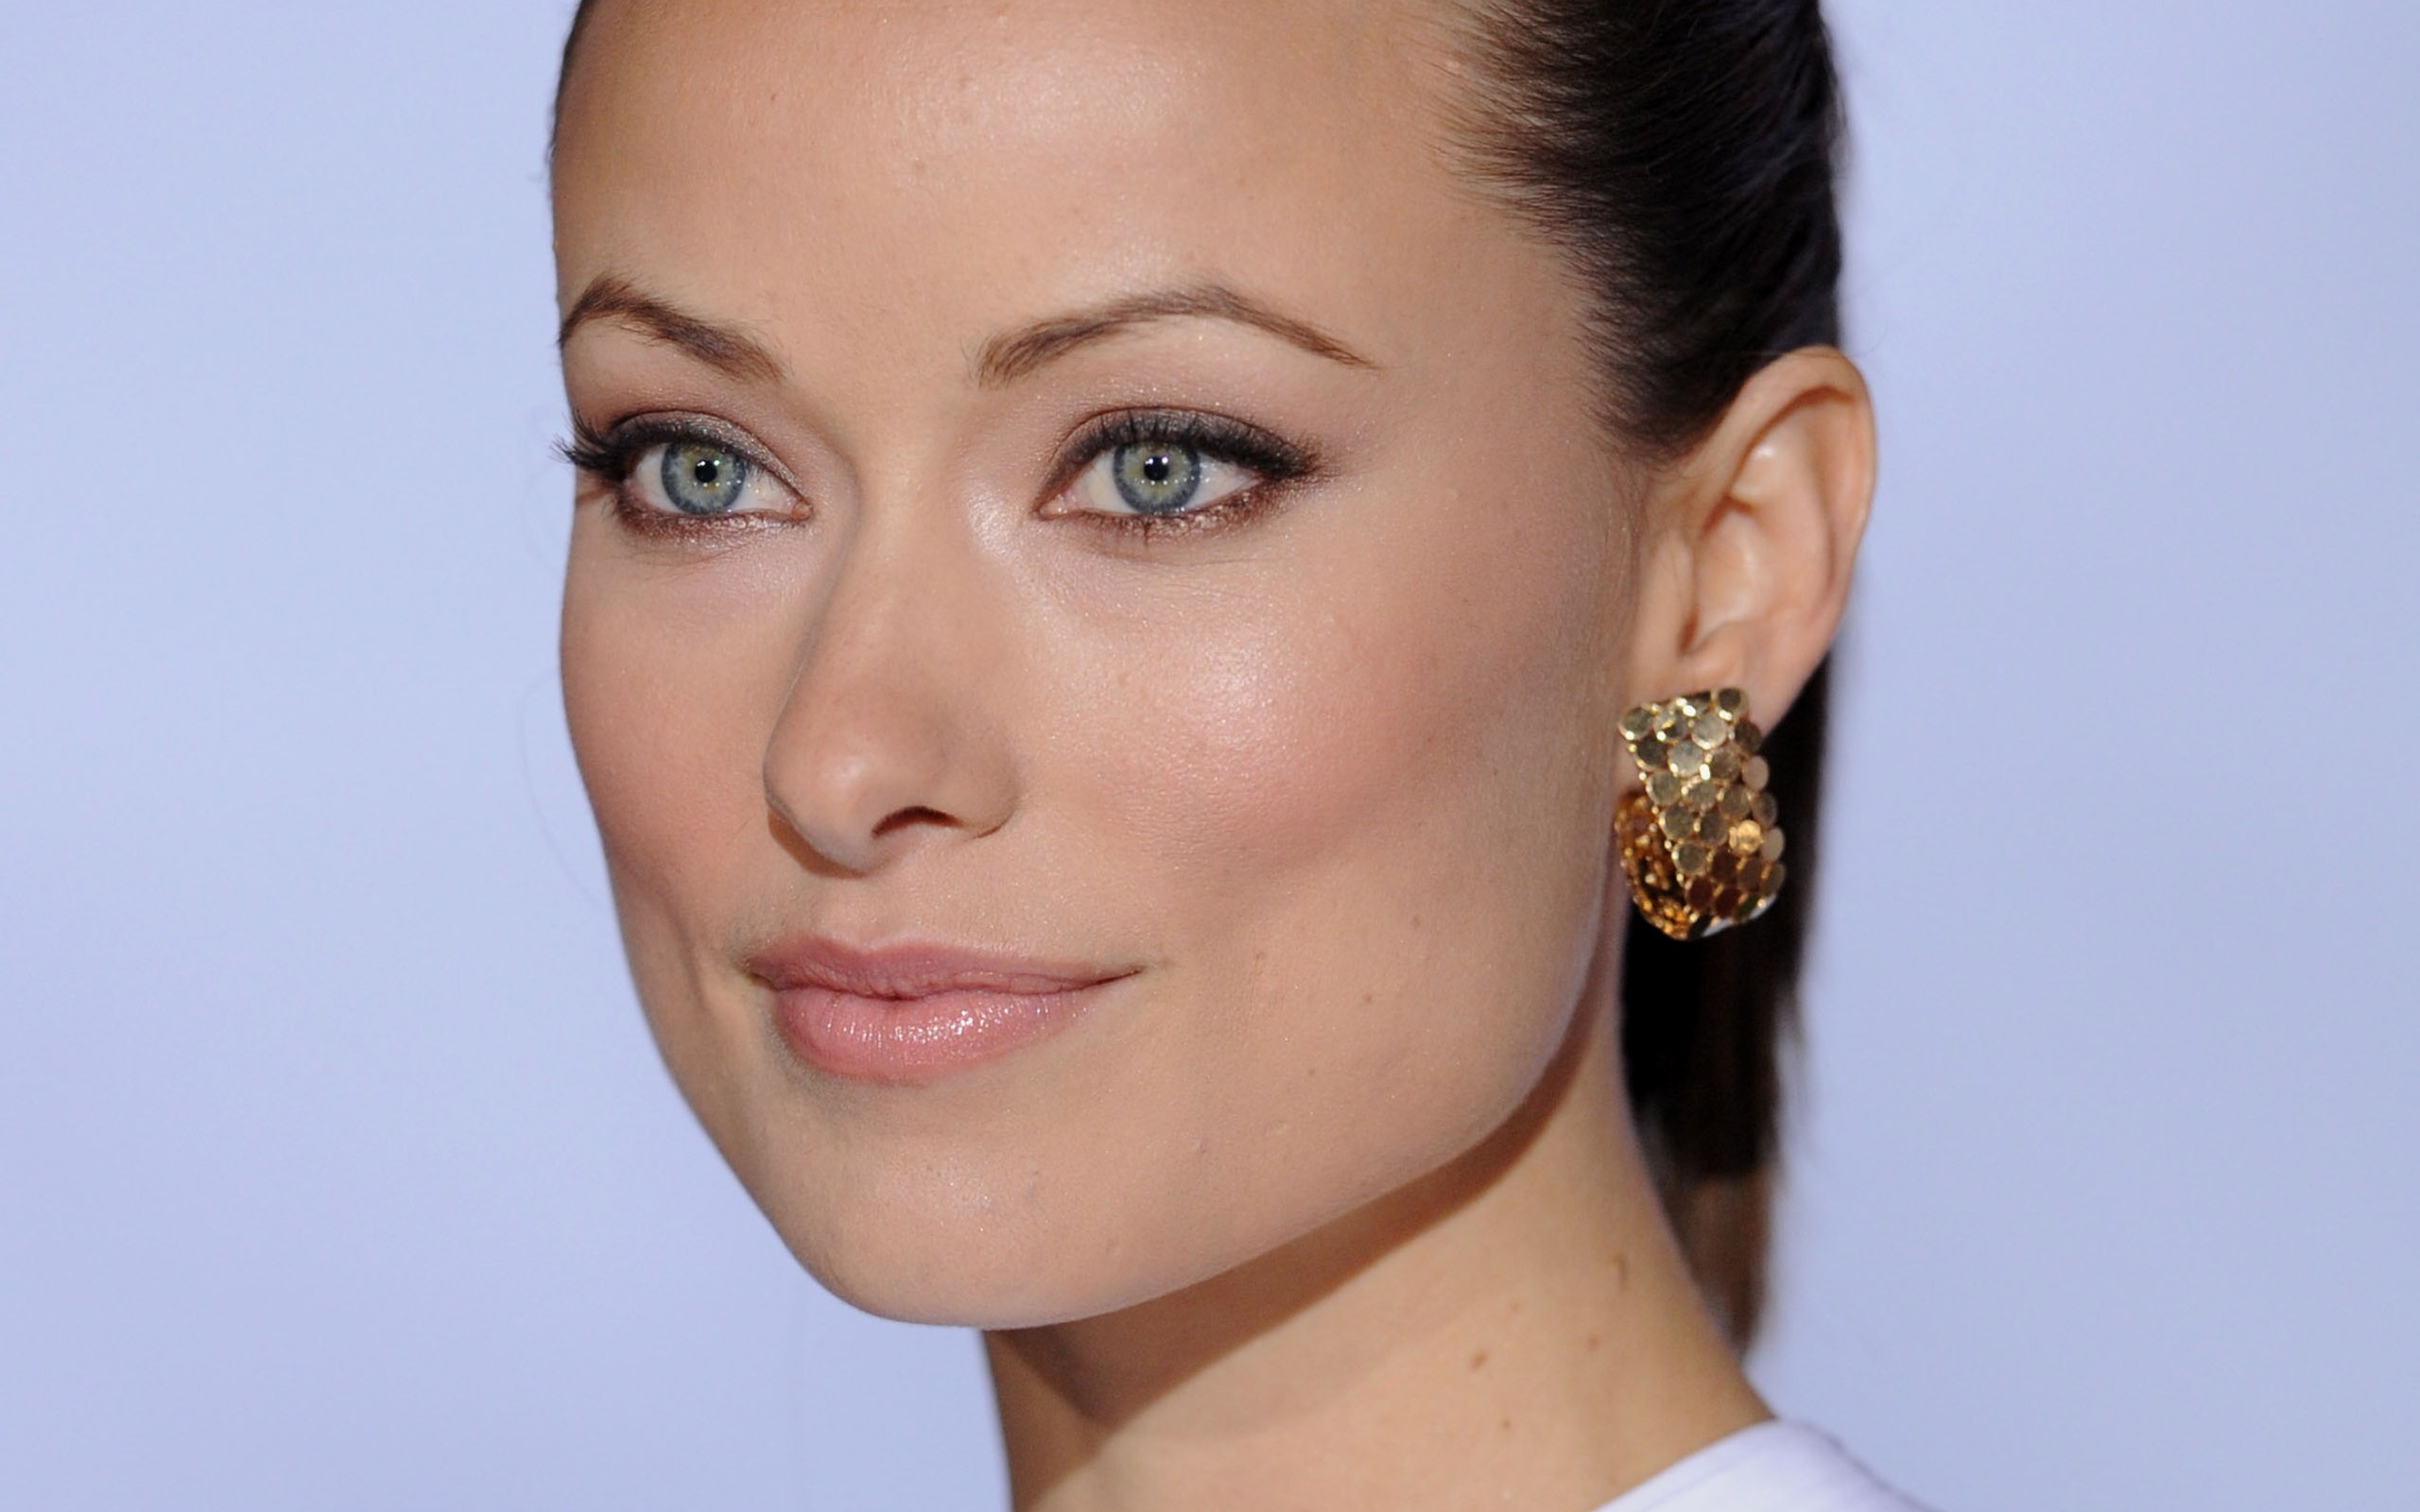 Download the following Olivia Wilde HD 1556 by clicking the button positioned underneath the "Download Wallpaper" section. Once your download is complete, ...